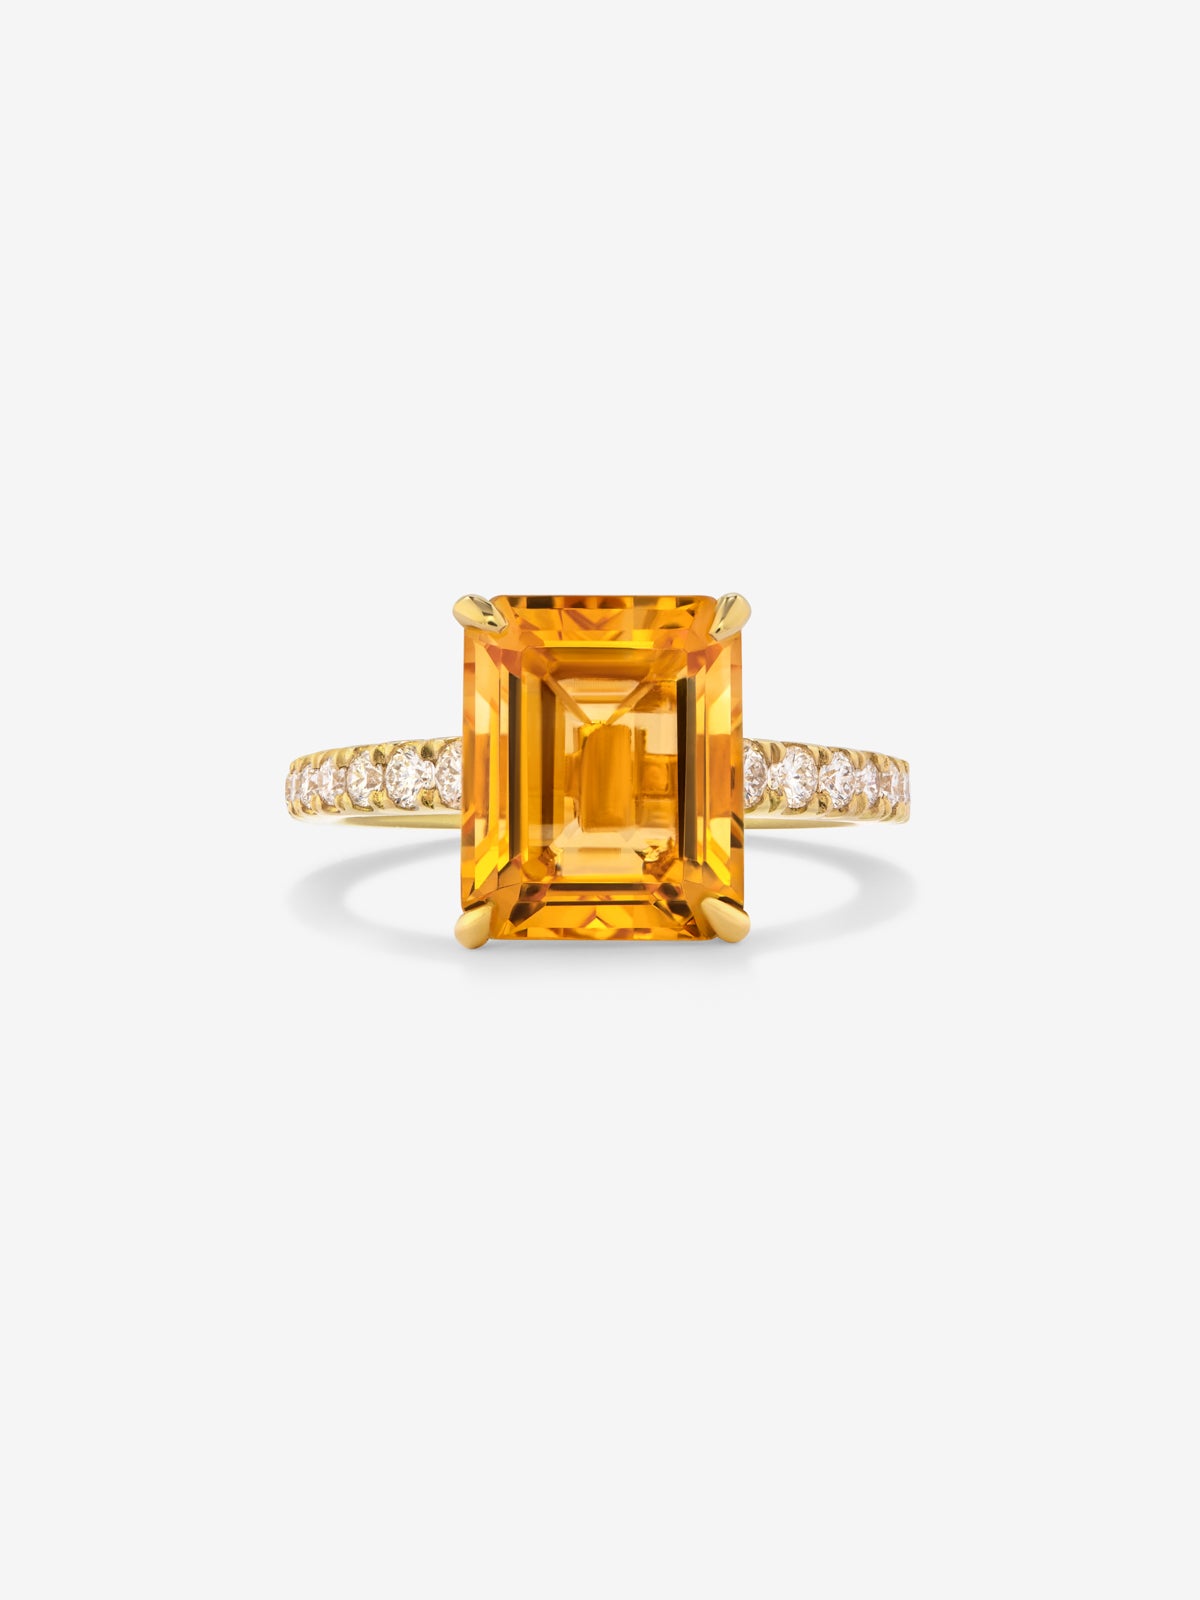 18K yellow gold ring with radiant cut citrine quartz of 1.2 cts and 18 brilliant cut diamonds with a total of 0.18 cts